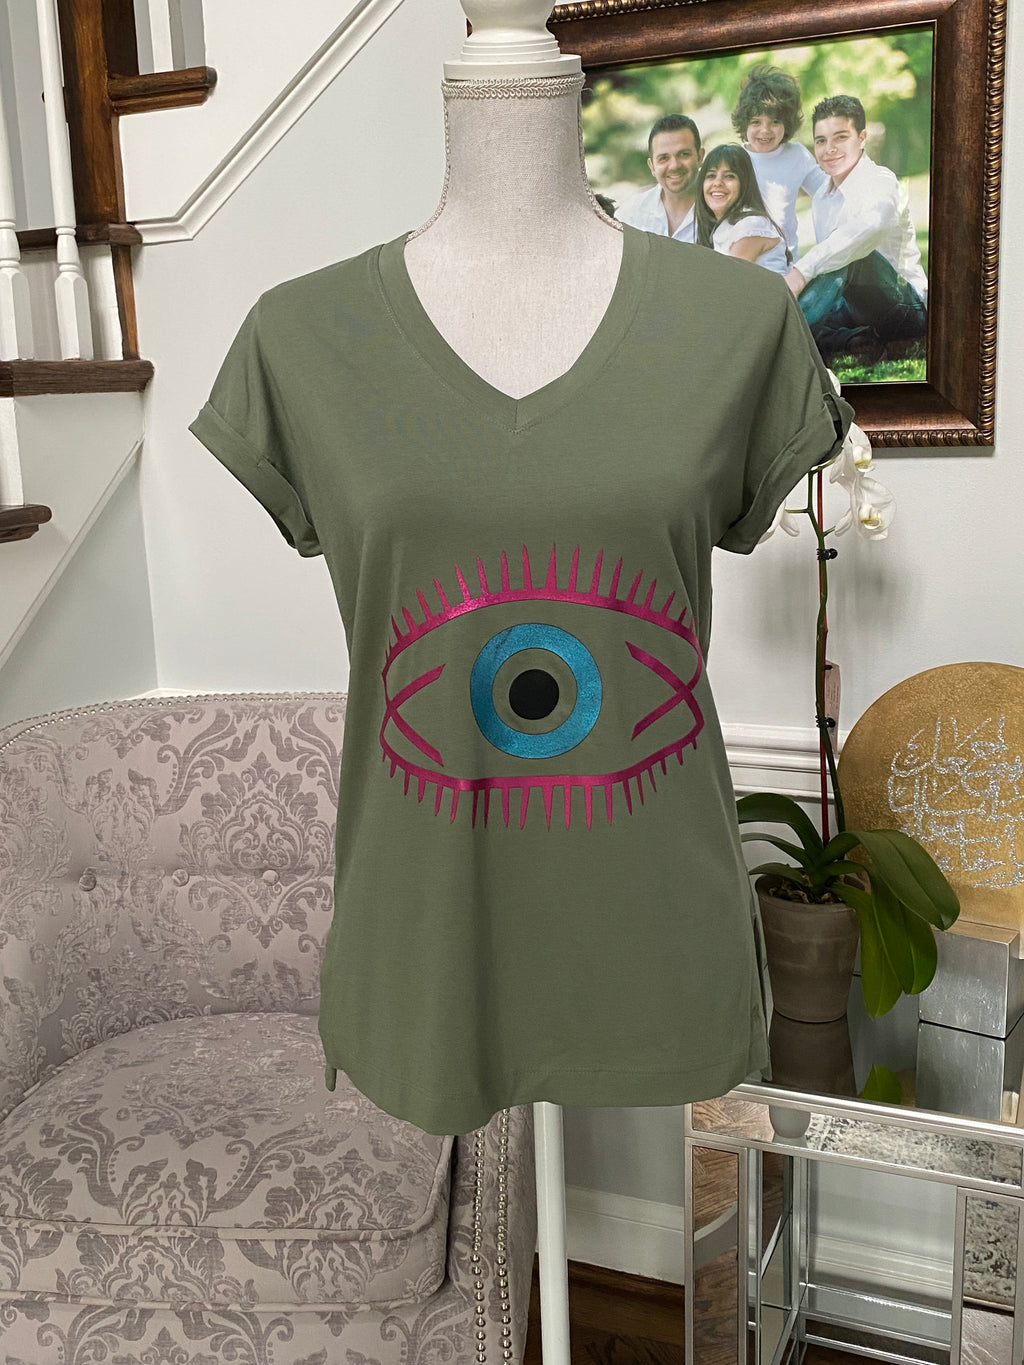 Army Green V-neck top with the eye design